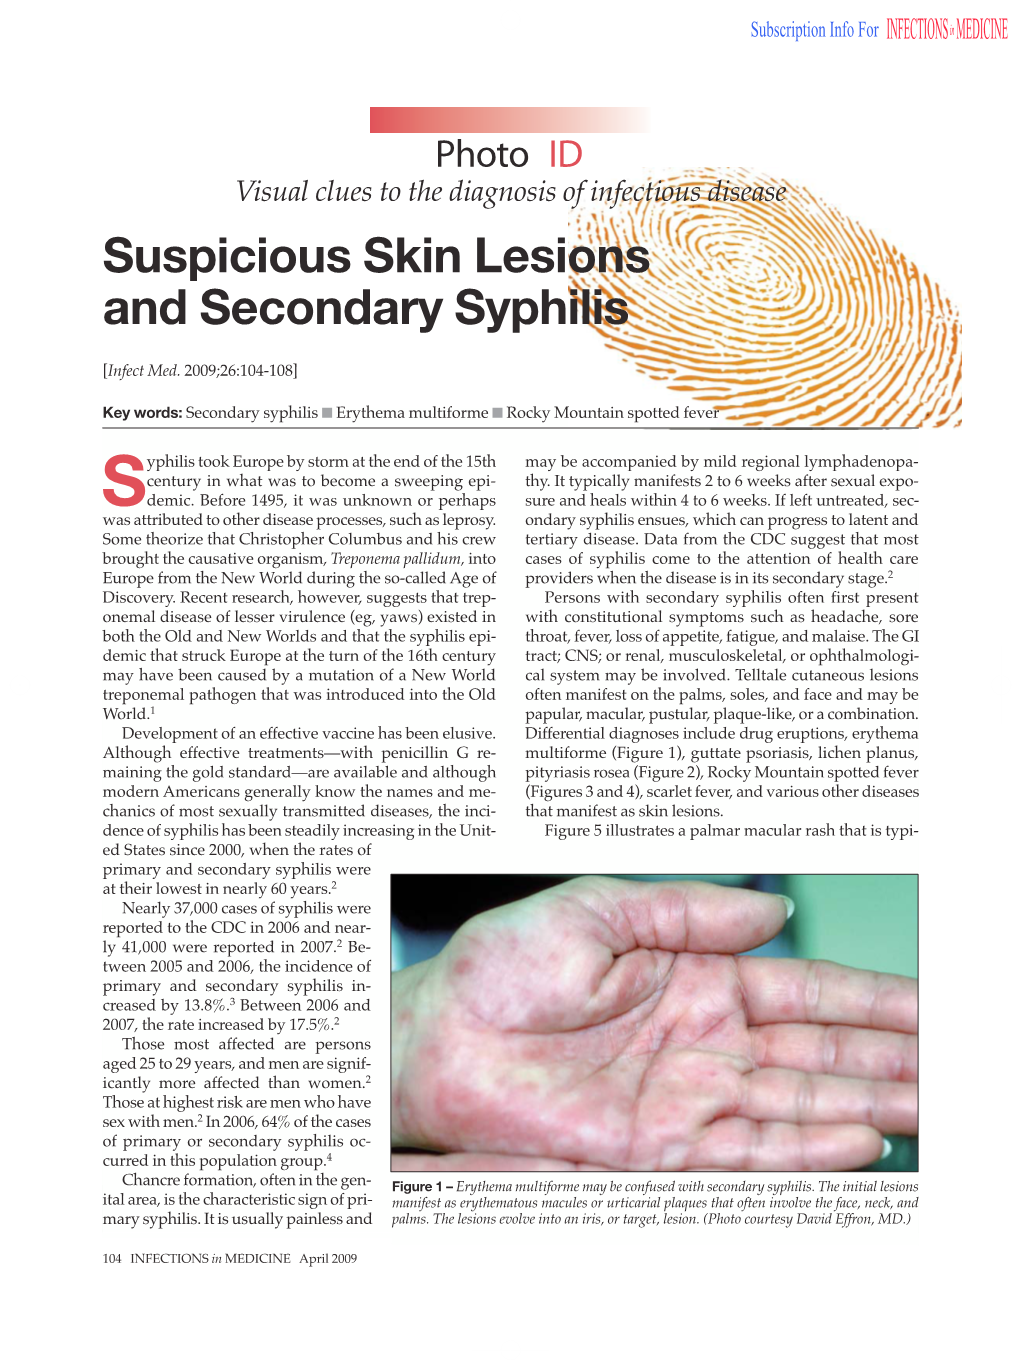 Suspicious Skin Lesions and Secondary Syphilis